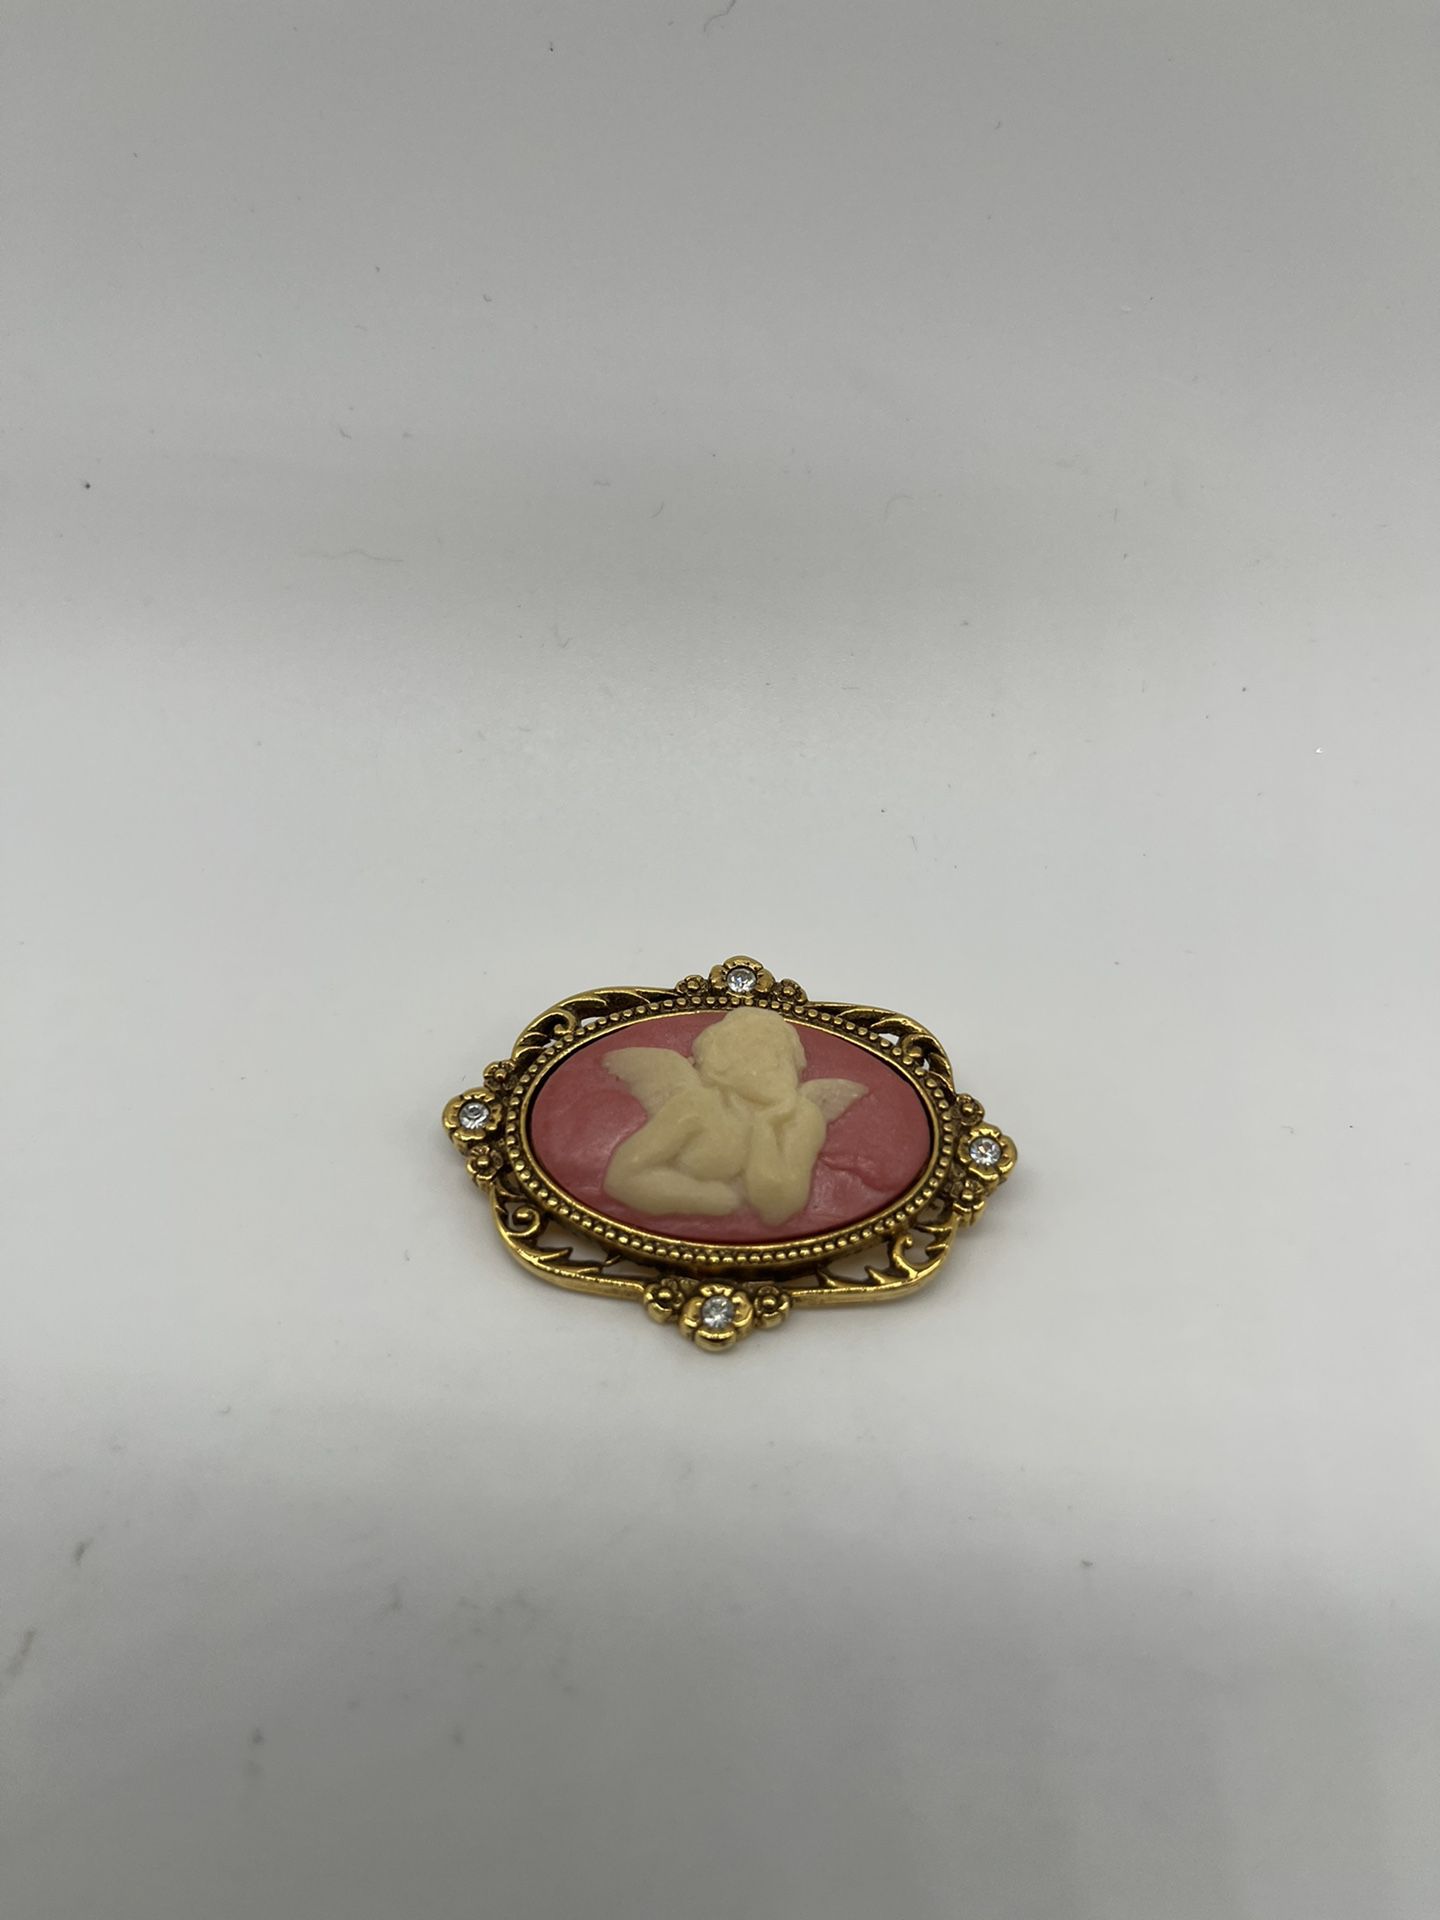 Vintage Cameo Jewelry The Vatican Library Collection Pink Angel Cherub Brooch Pin